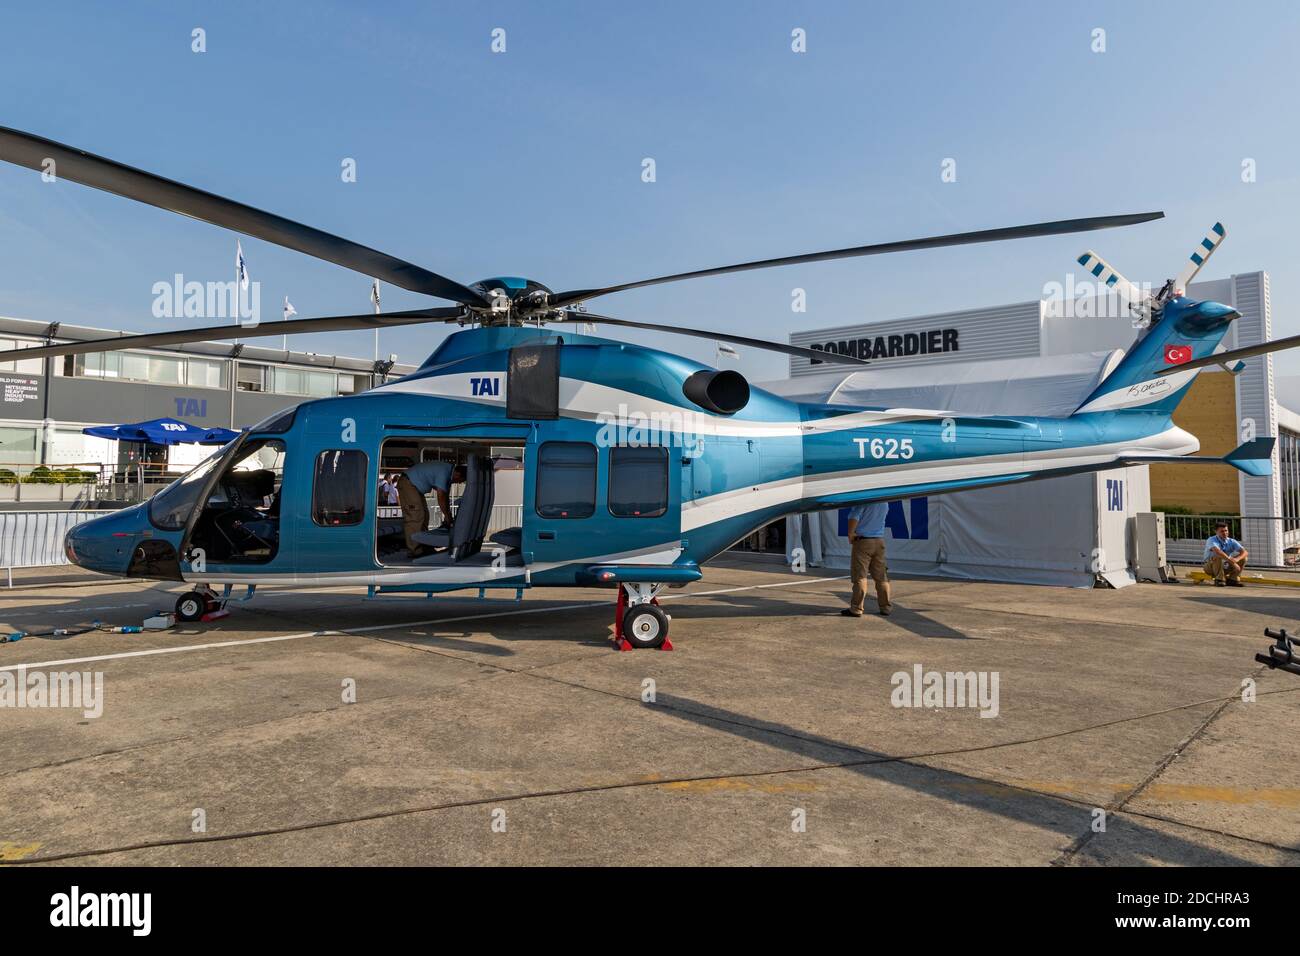 Turkish Aerospace Industries (TAI) T625 Gökbey utility helicopter on display at the Paris Air Show. France - Jun 22, 2017 Stock Photo